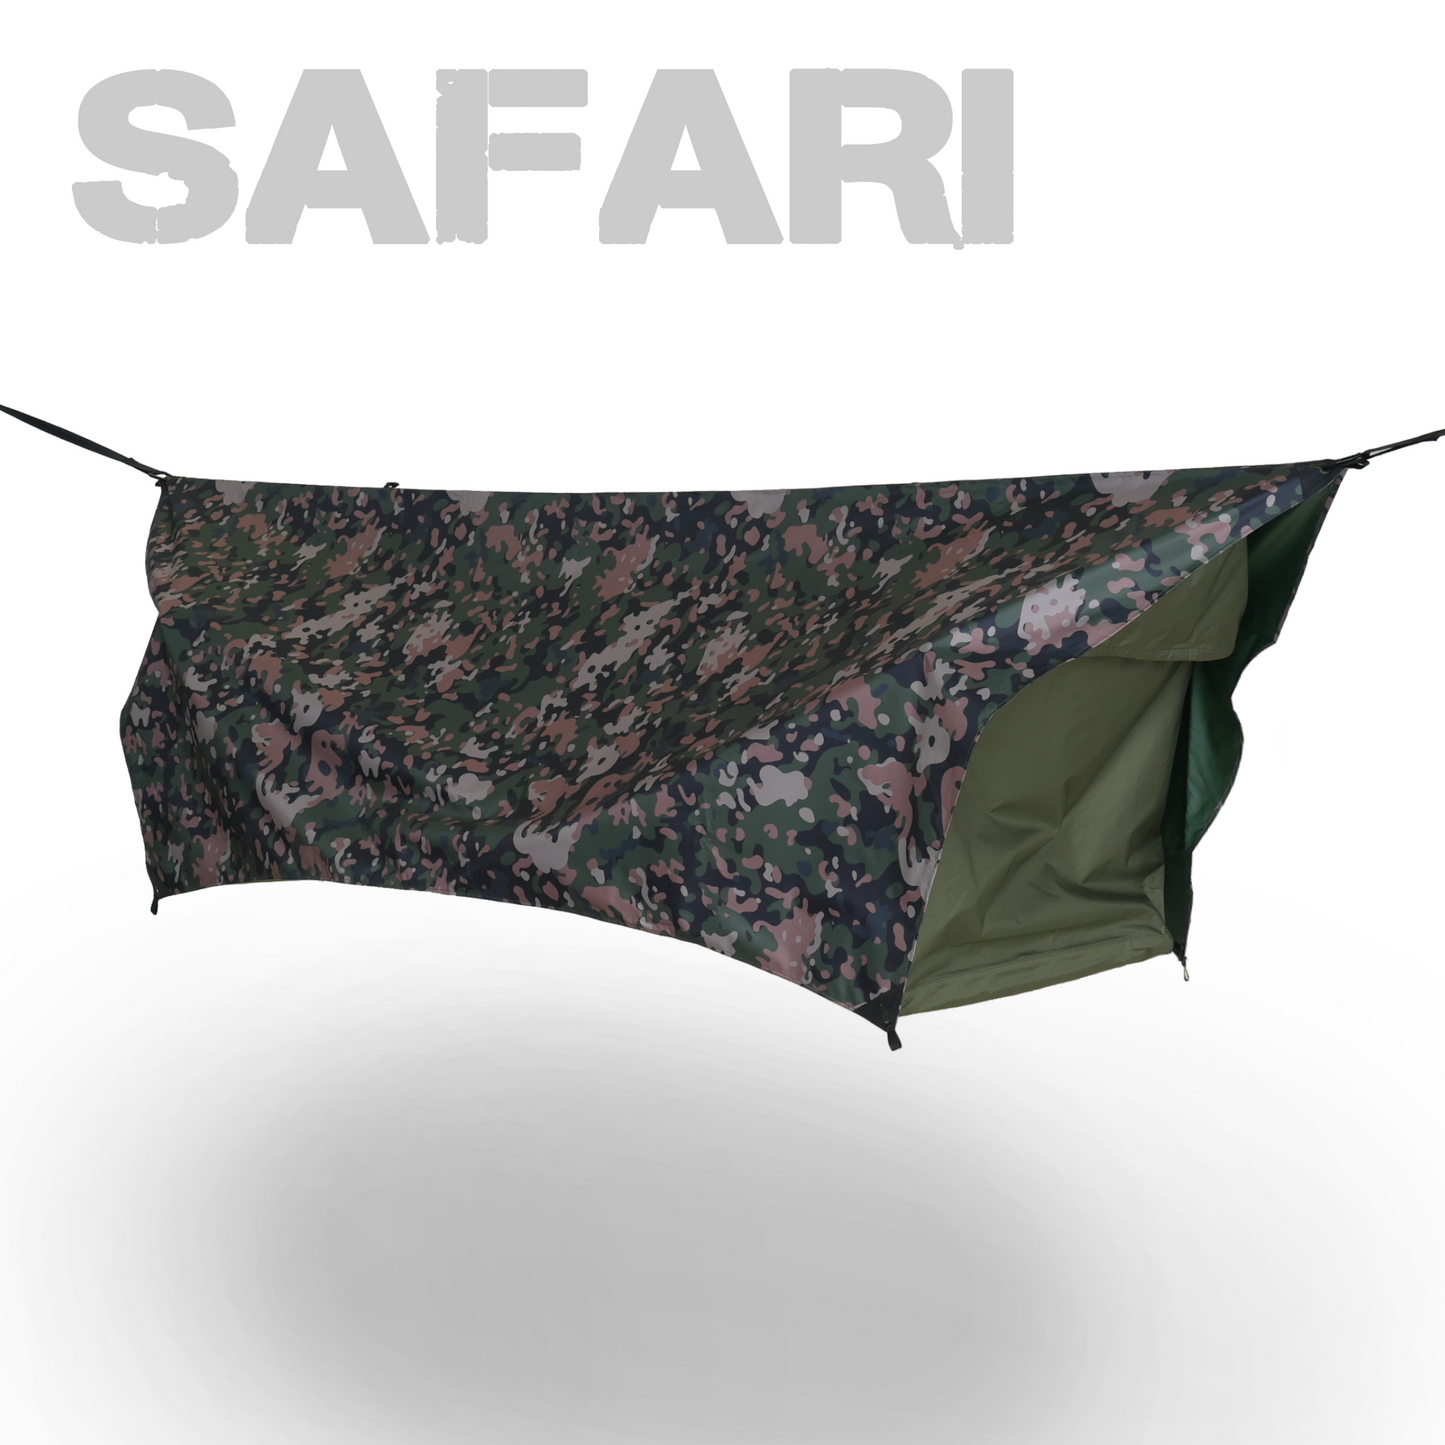 Portable camping hammock with a camouflage cover 